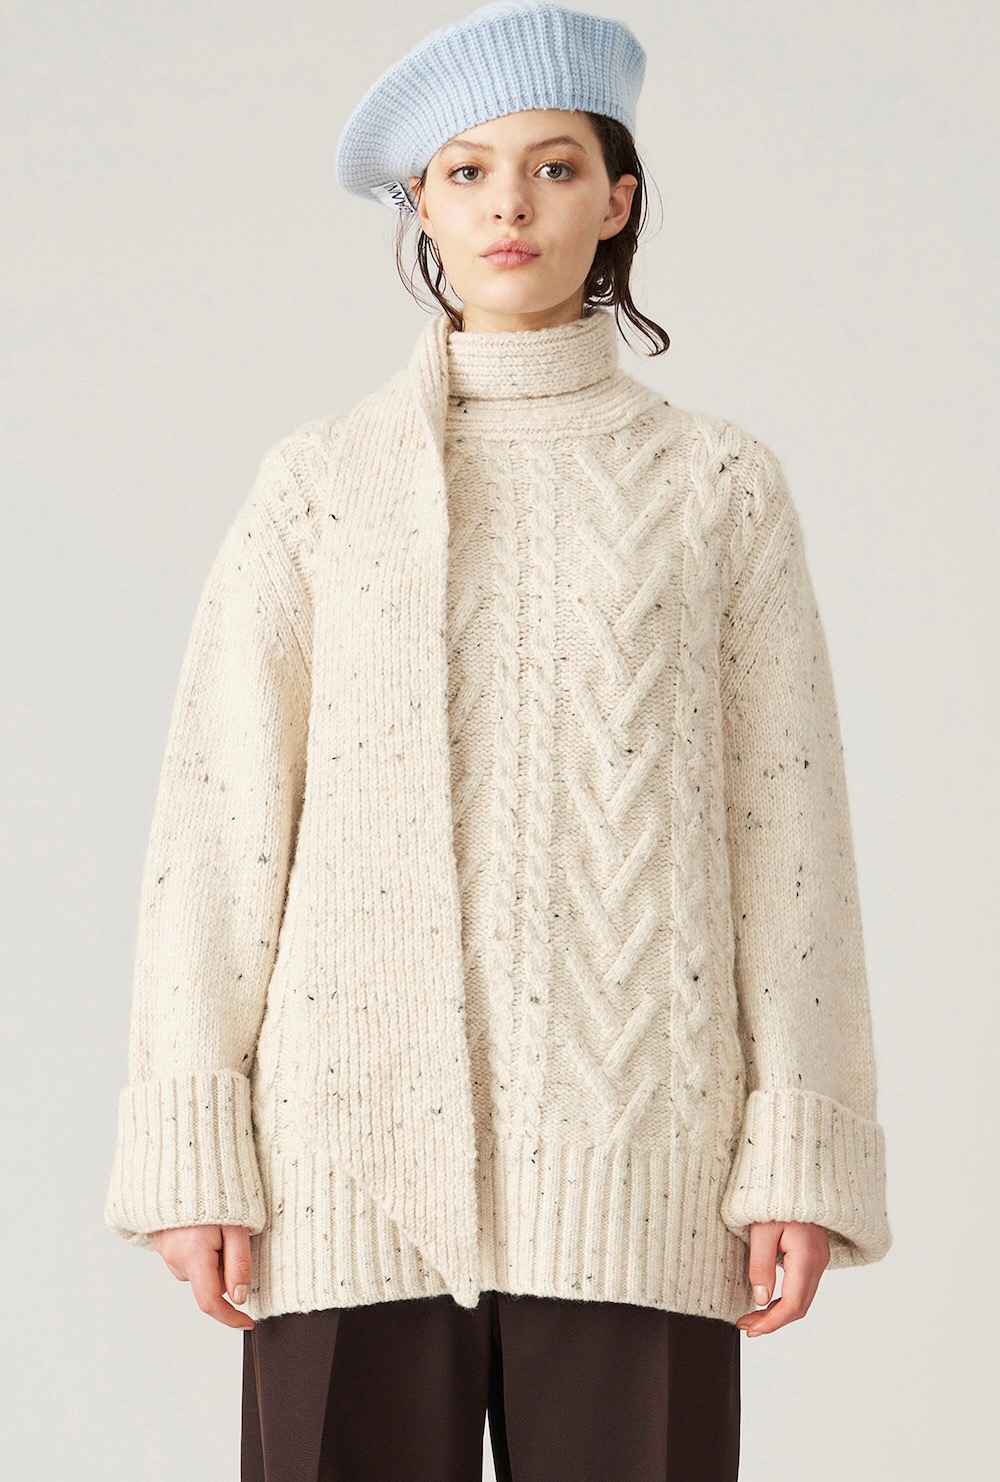 Cable-Knit Sweaters That Are Far From Basic - theFashionSpot